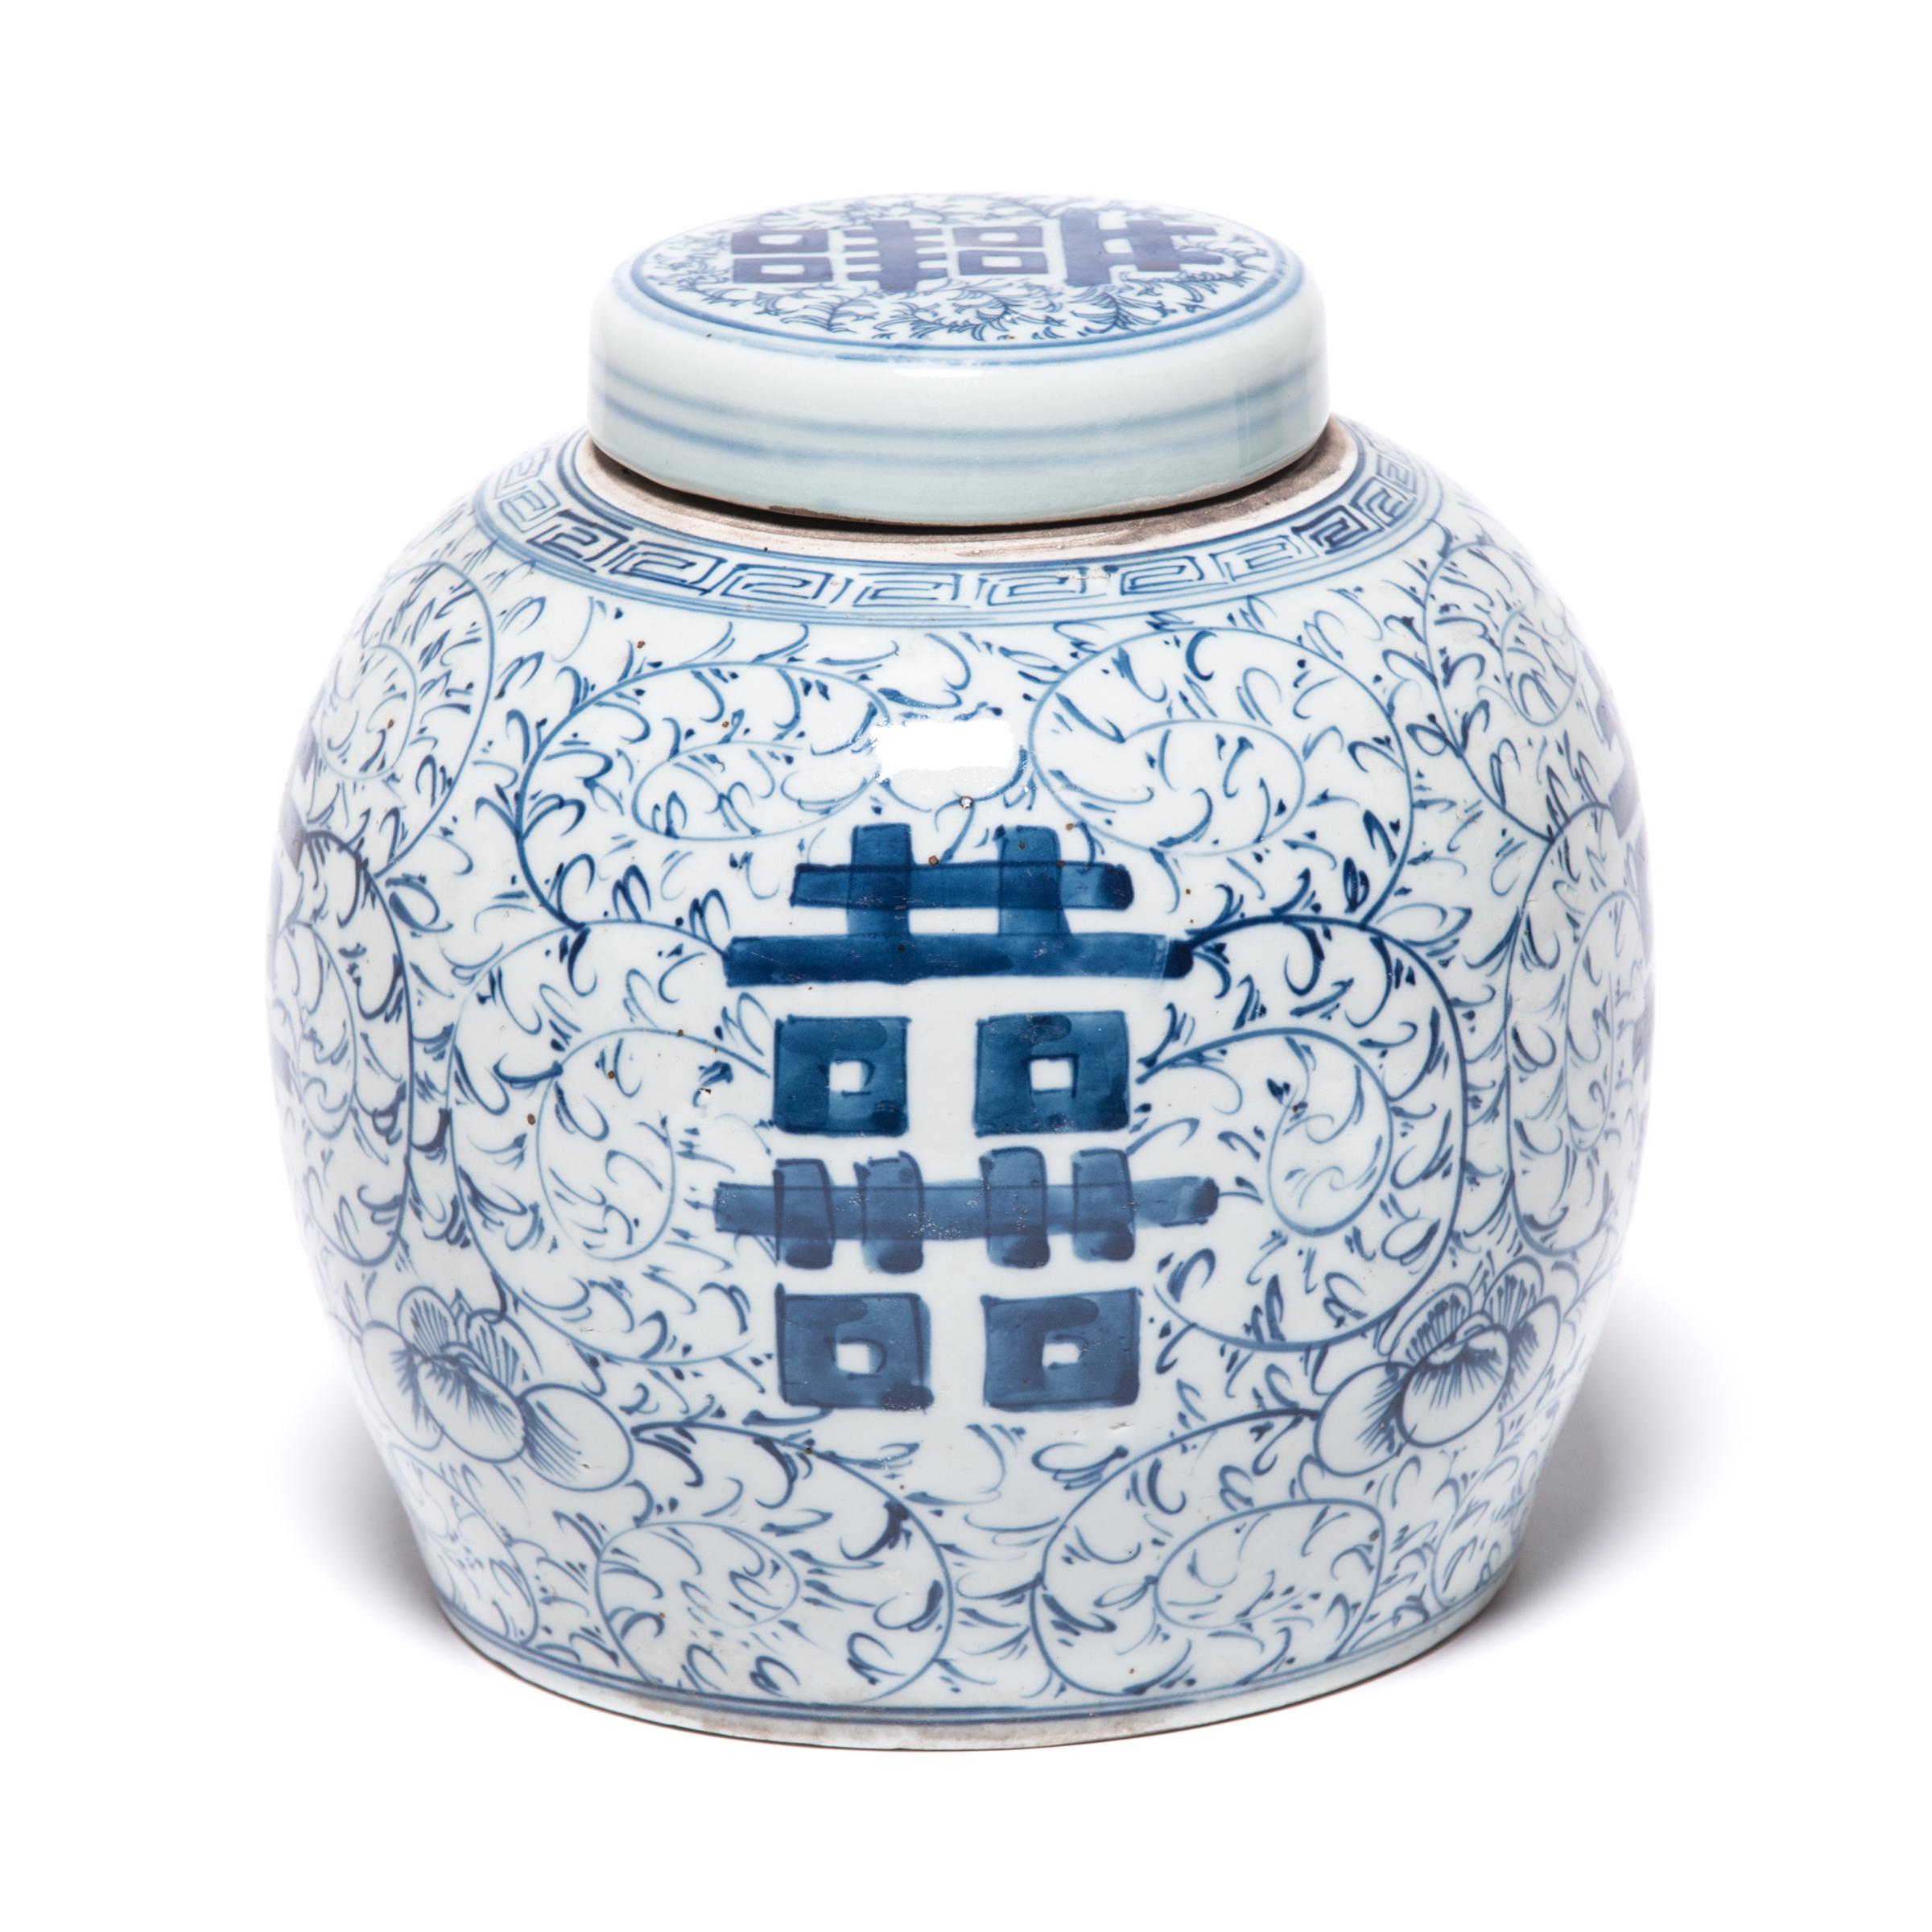 This early 20th century blue-and-white ginger jar was originally used for storing spices. Bordered by a simple meander, the jar is densely patterned with trailing vines and orchid blossoms, symbols of love and beauty. On either side of the round jar